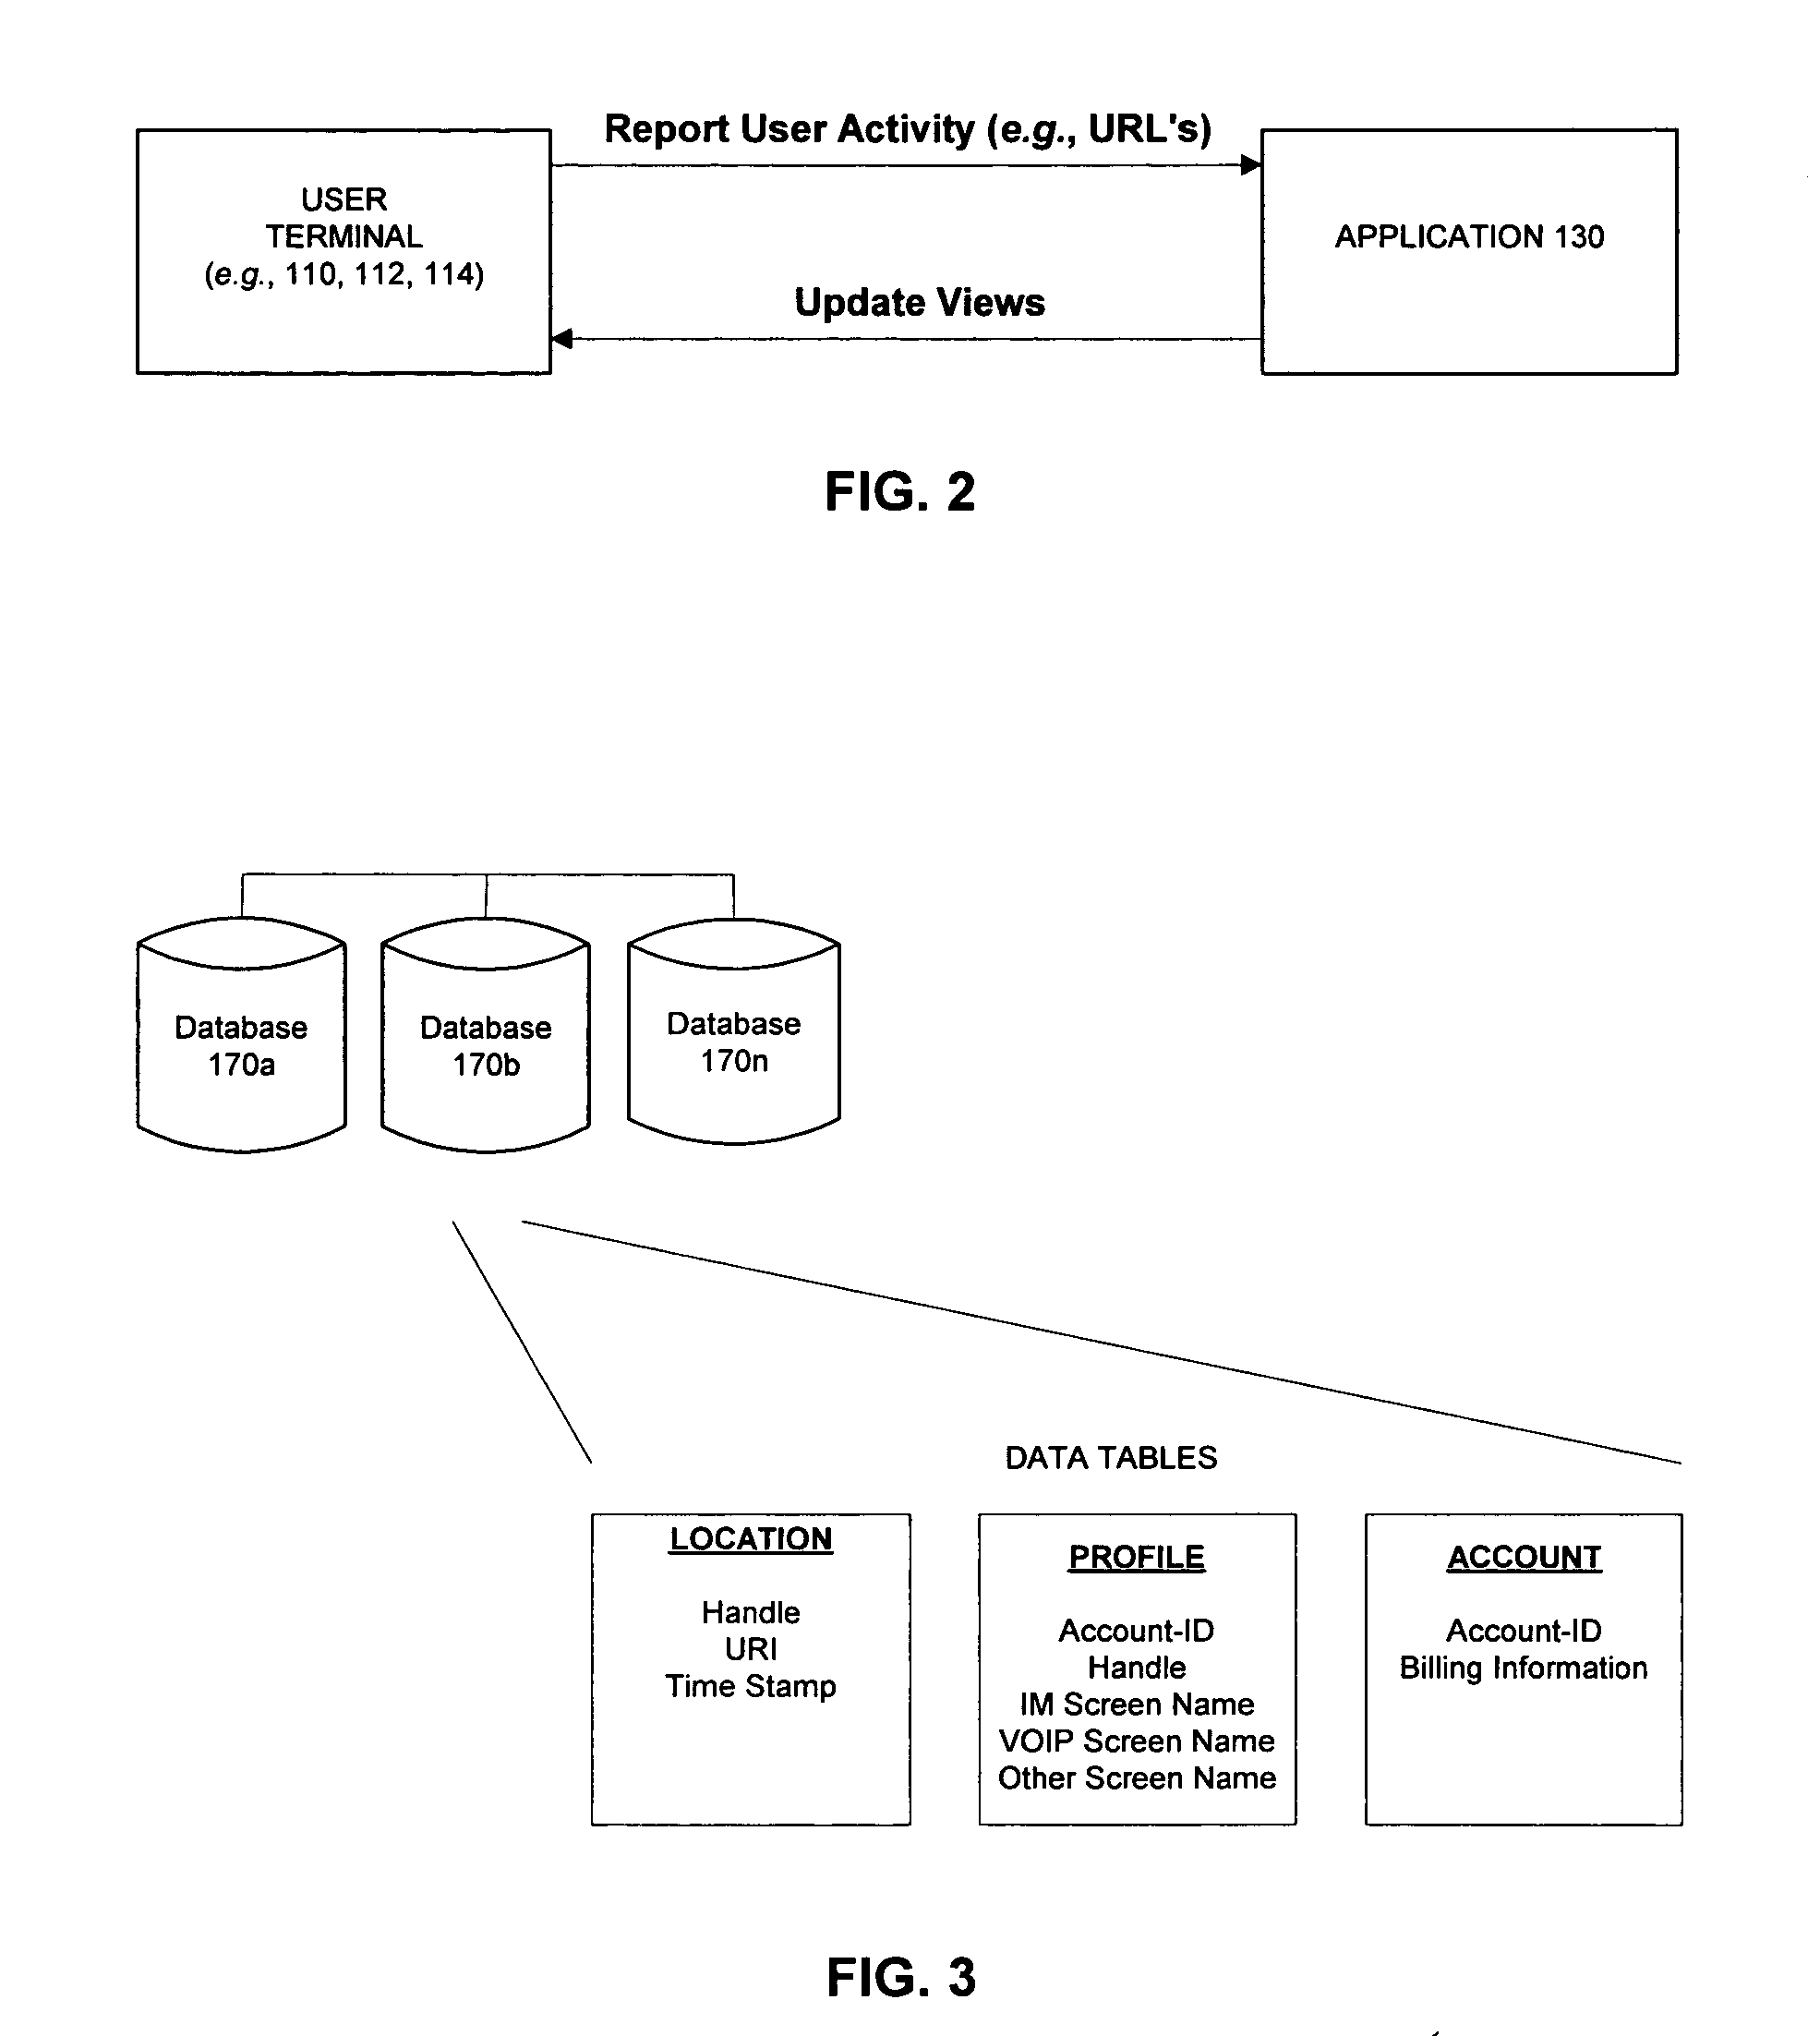 System and method for enabling identification of network users having similar interests and facilitating communication between them